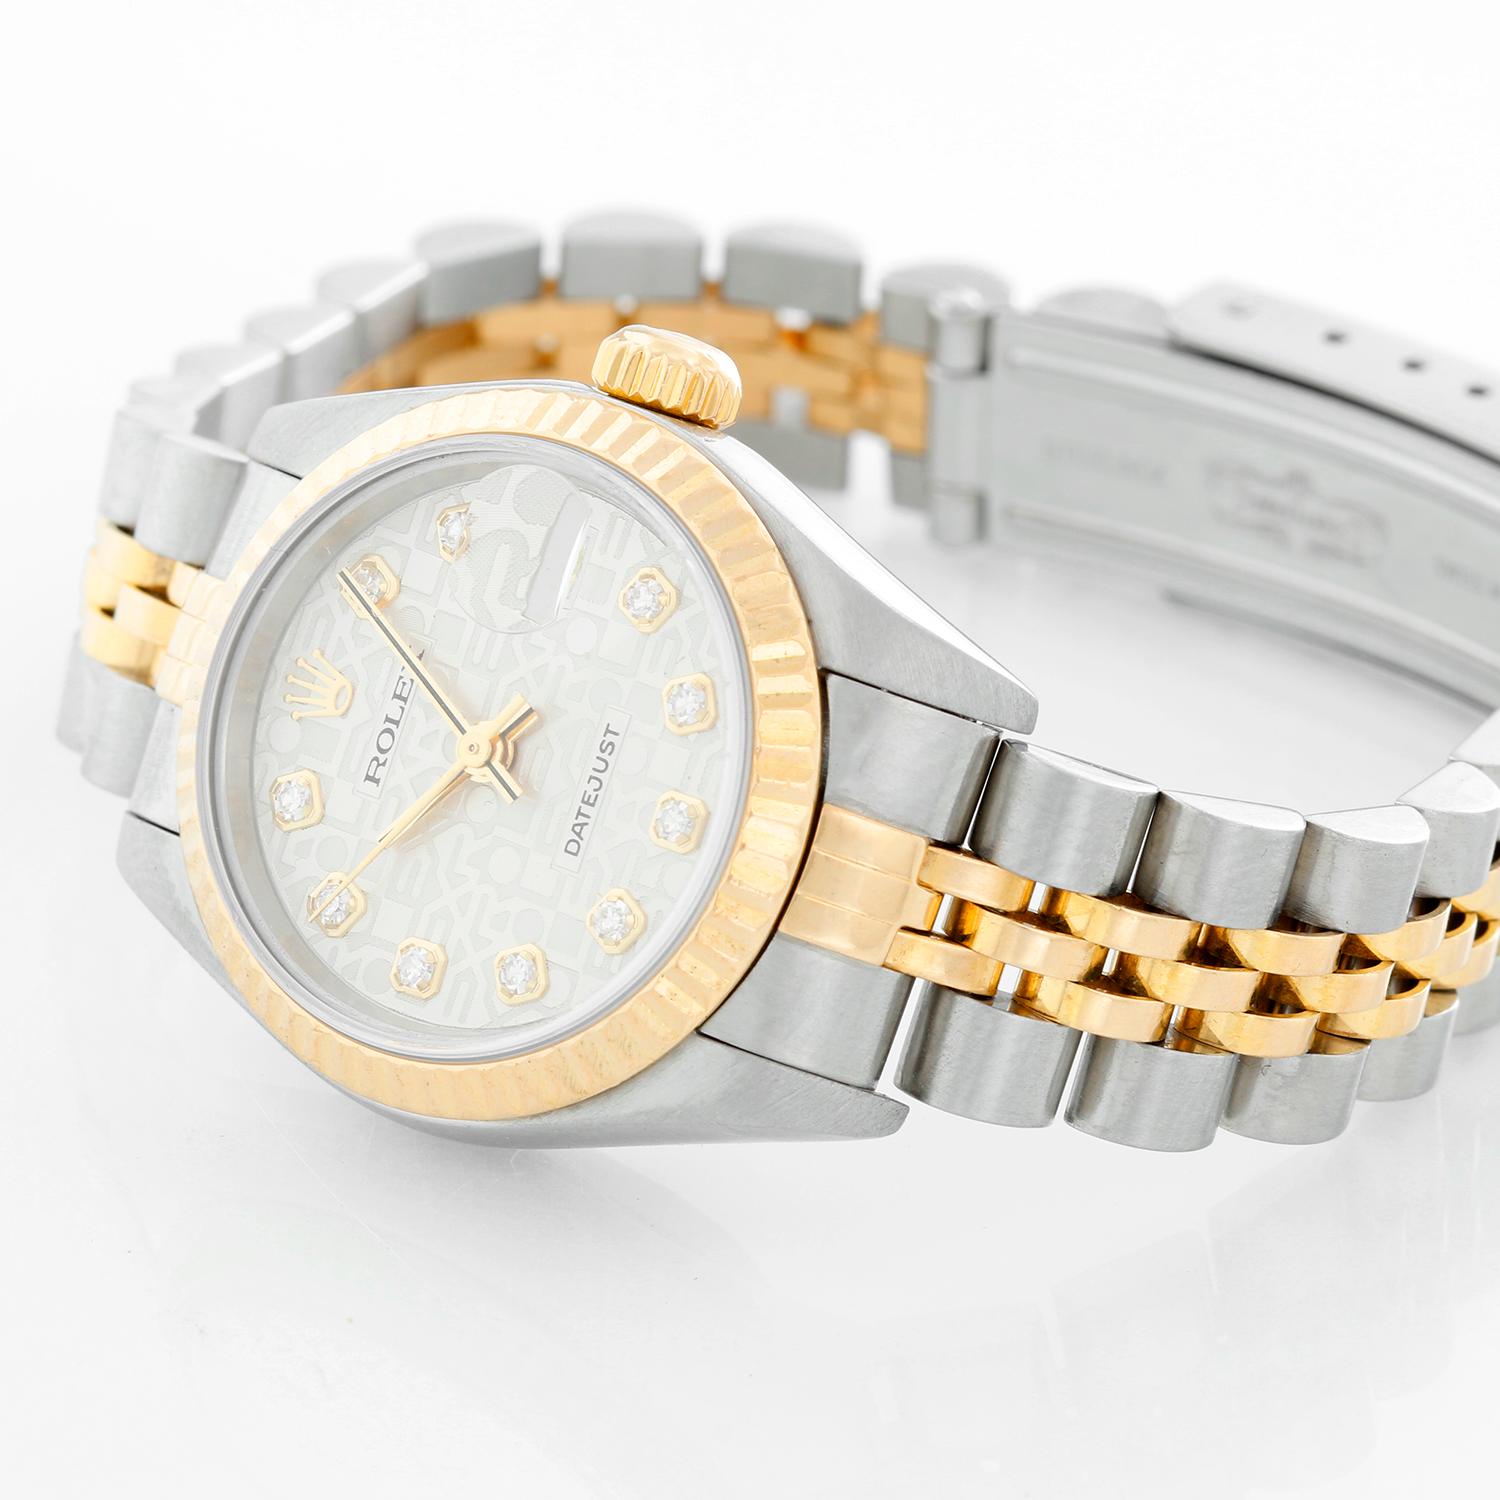 Rolex Ladies Datejust 2-Tone Steel & Gold Watch 79173 - Automatic winding, 29 jewels, Quickset date, sapphire crystal. Stainless steel case with 18k yellow gold fluted bezel  (26mm diameter). Genuine Rolex Silver Jubilee diamond dial. Stainless